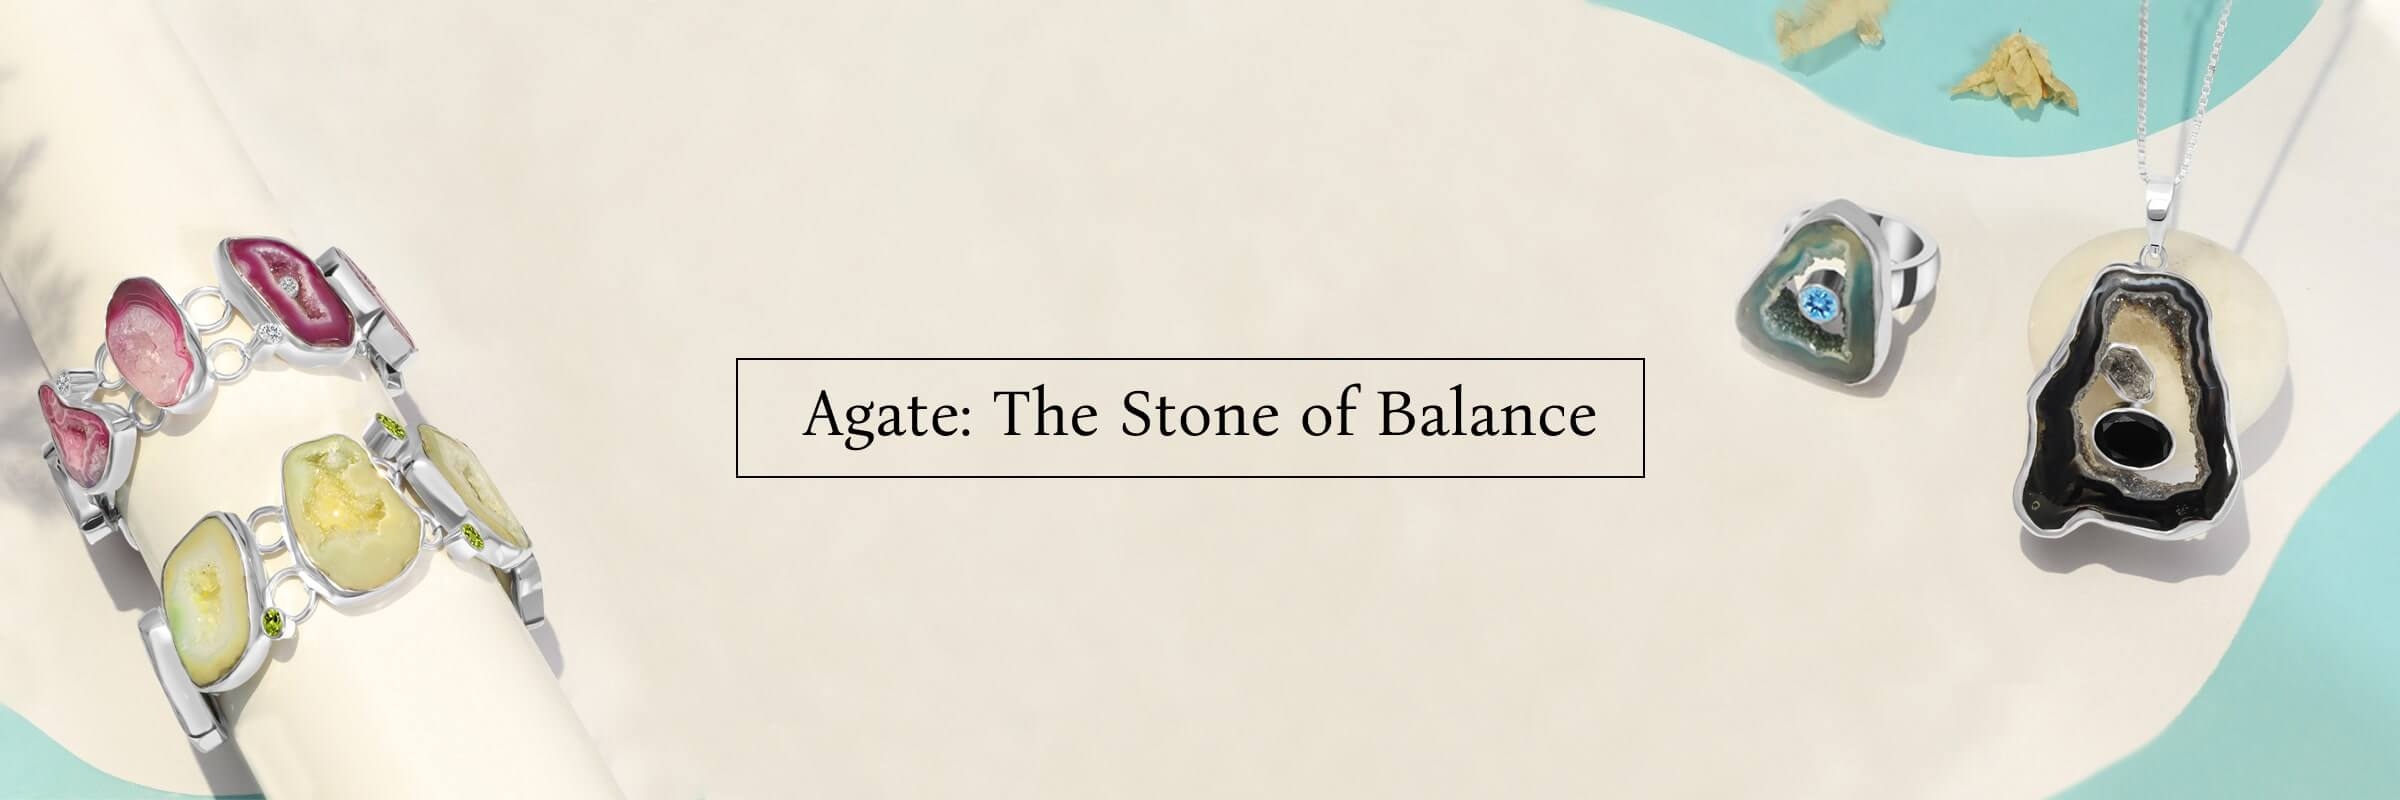 Agate: The Stone of Balance 1